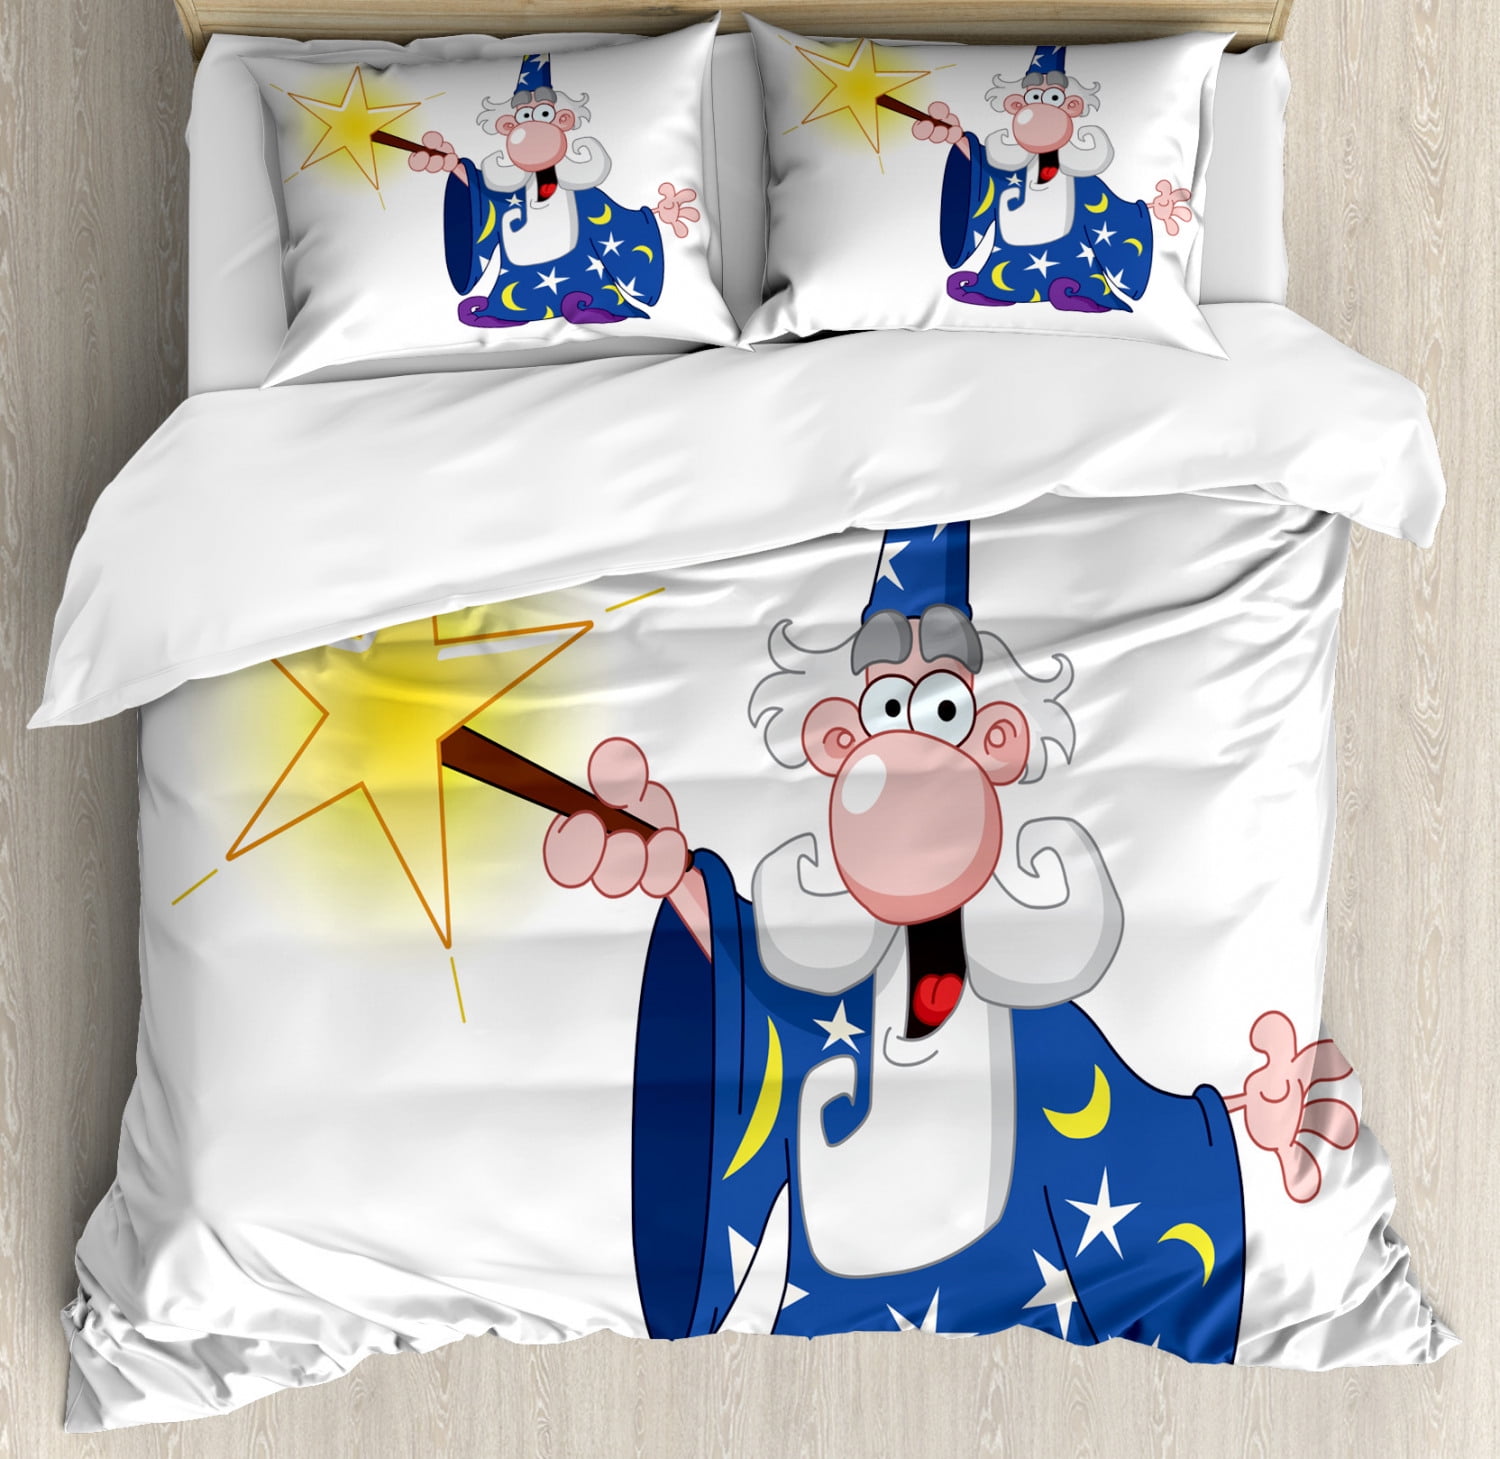 Wizard Duvet Cover Set King Size Medieval Ancient Mage With A